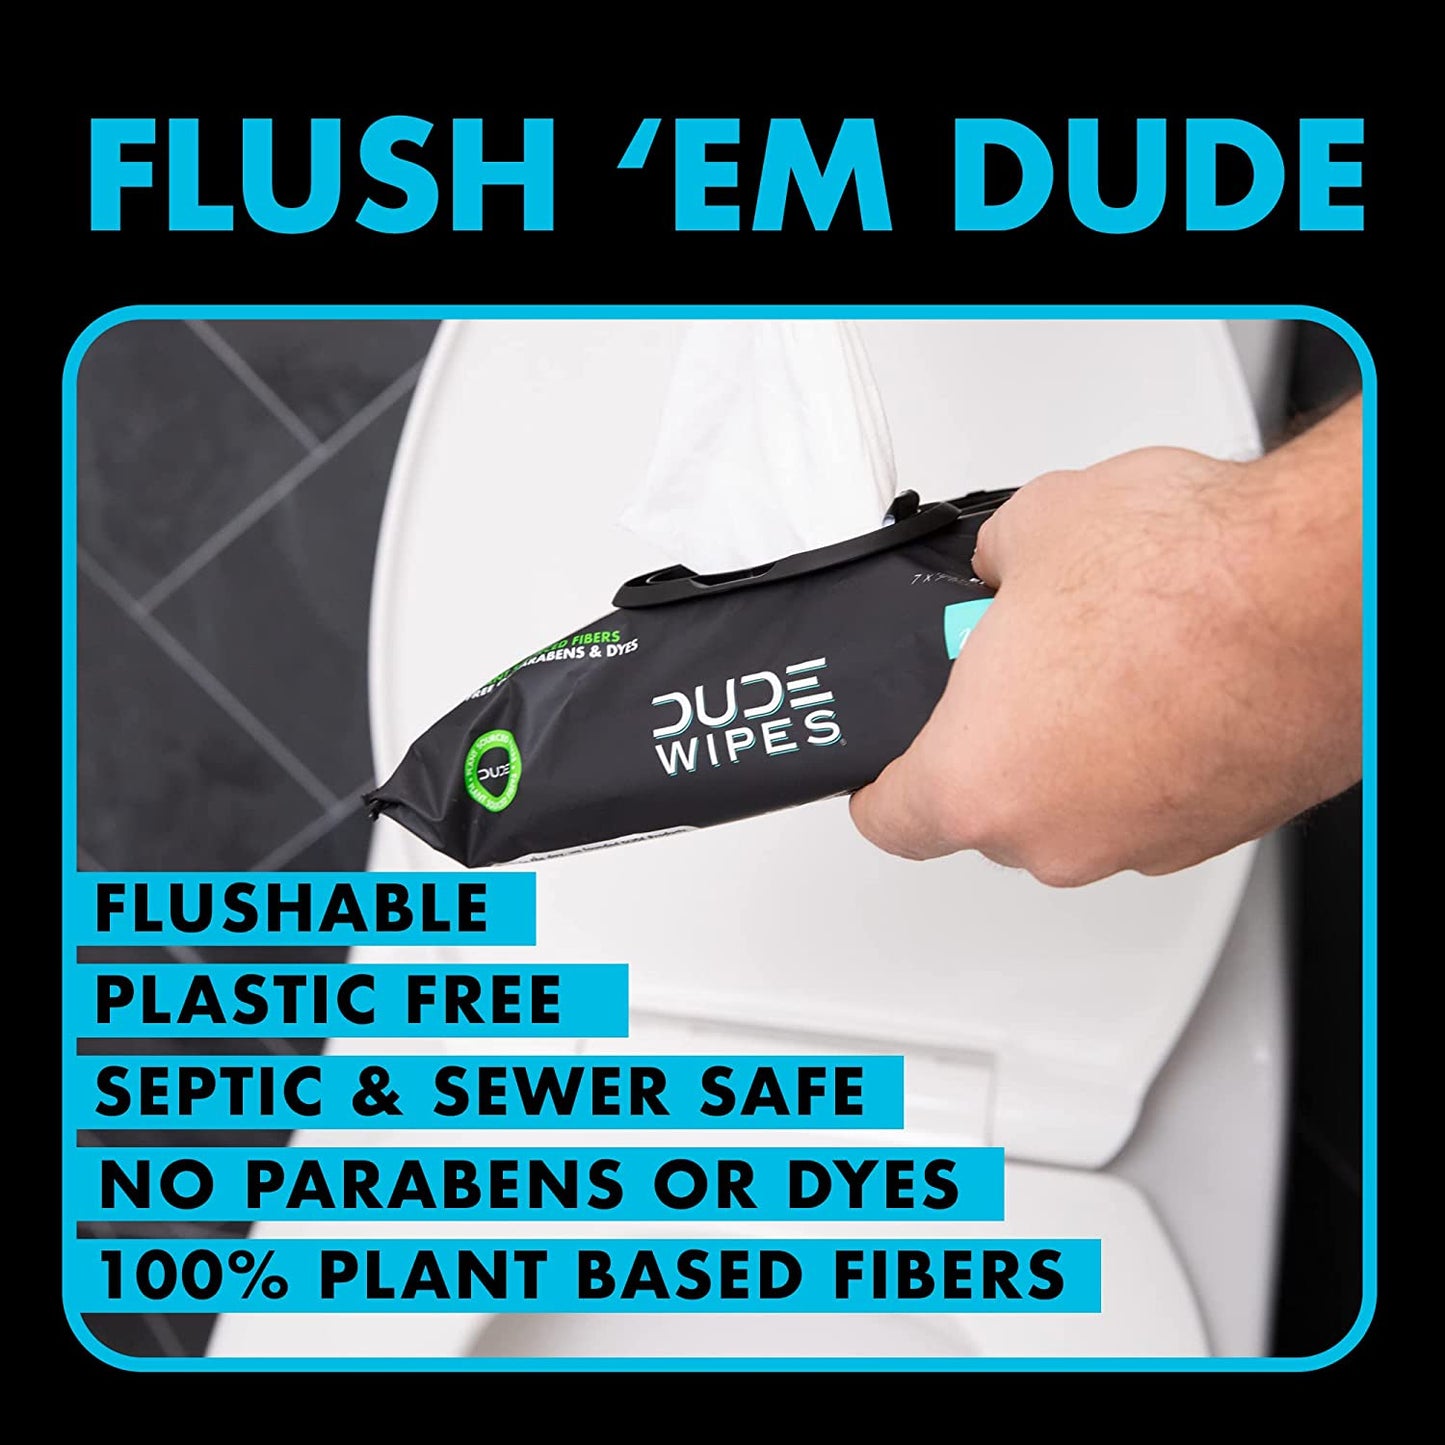 A hand is holding a pouch of dude wipes in a bathroom.